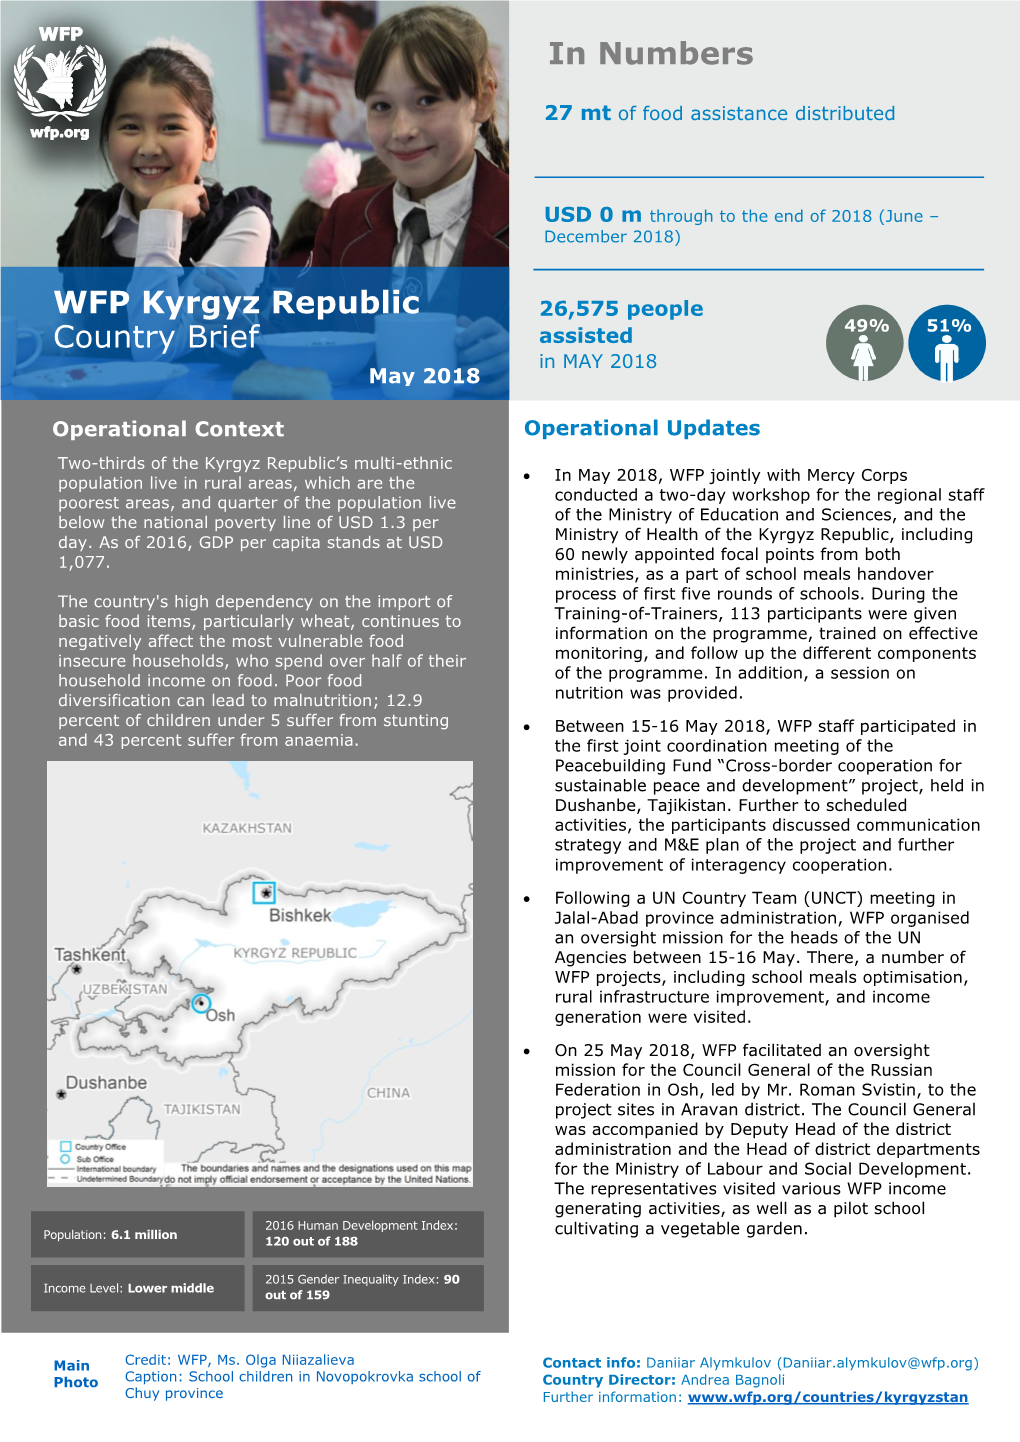 WFP Kyrgyz Republic Country Brief in Numbers